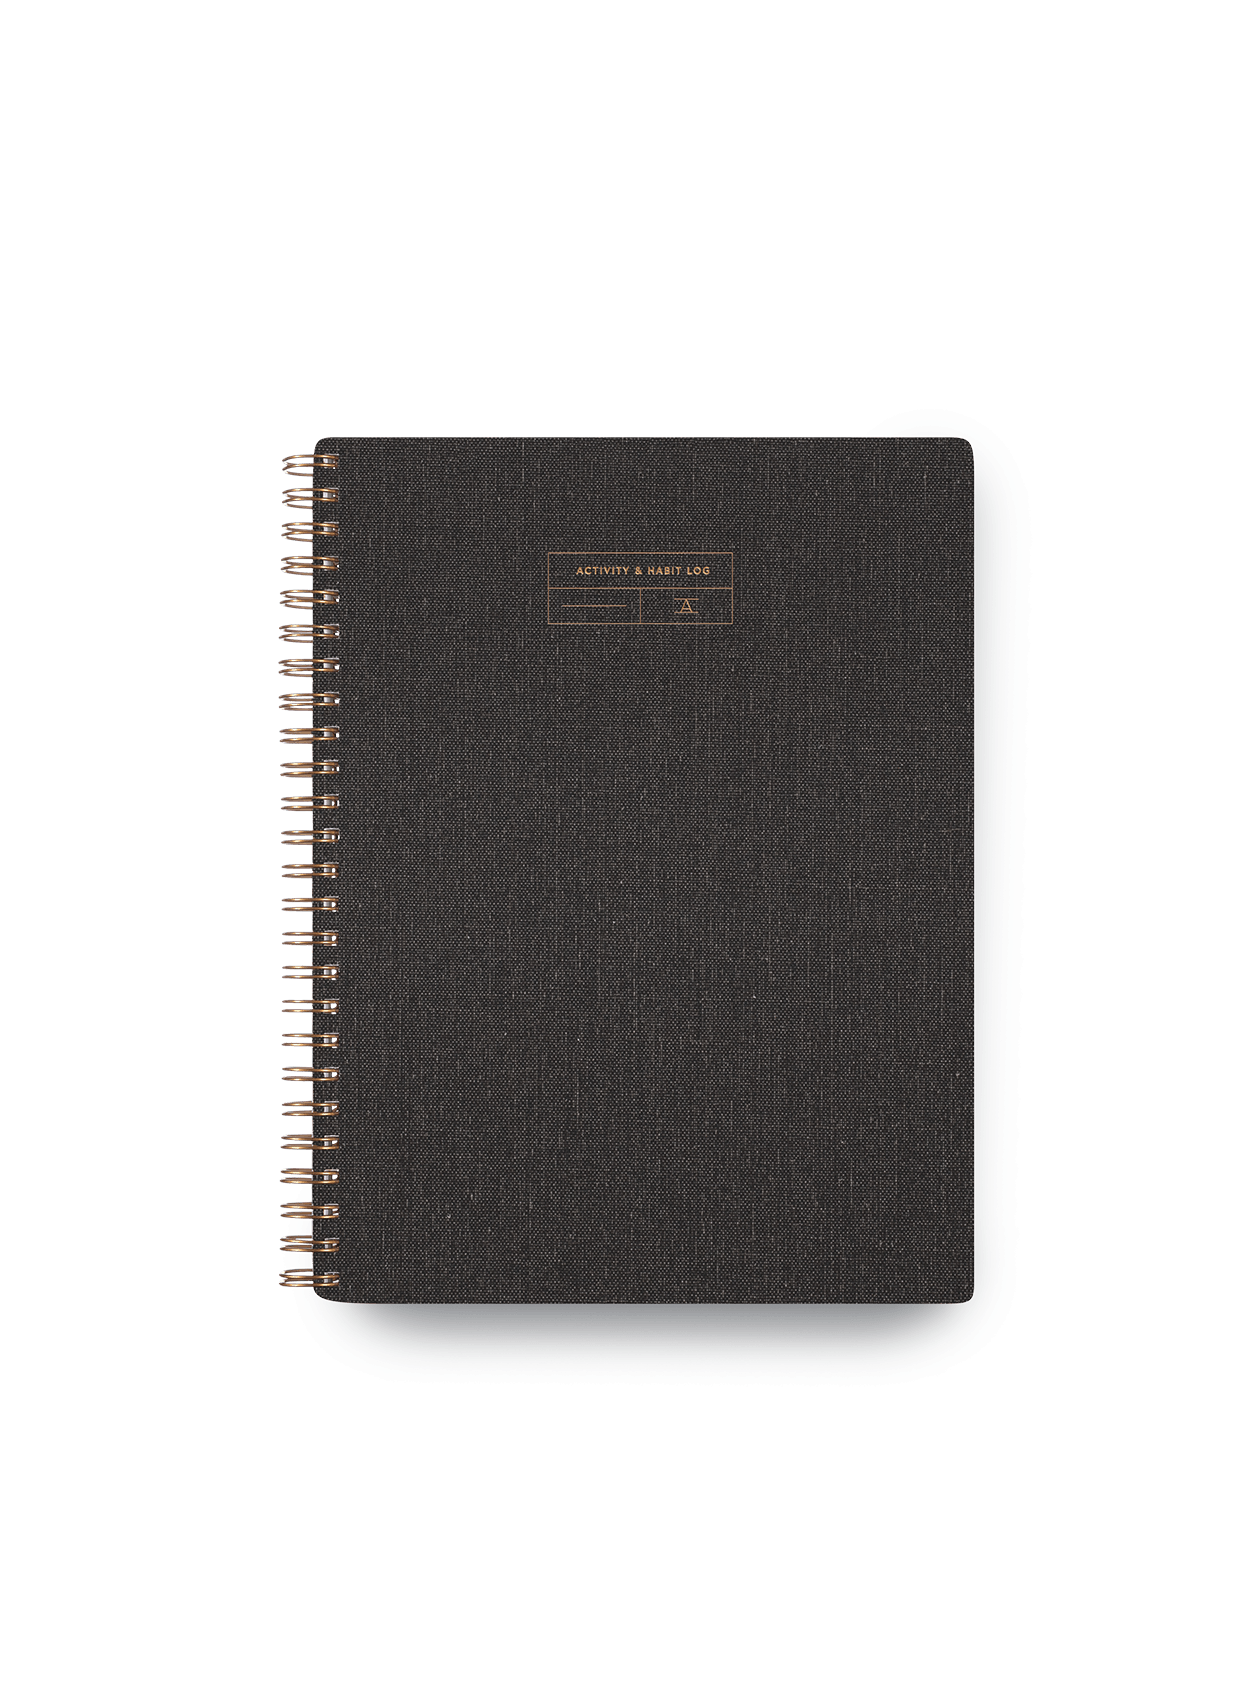 Activity & Habit Log front cover in Charcoal Gray || Charcoal Gray